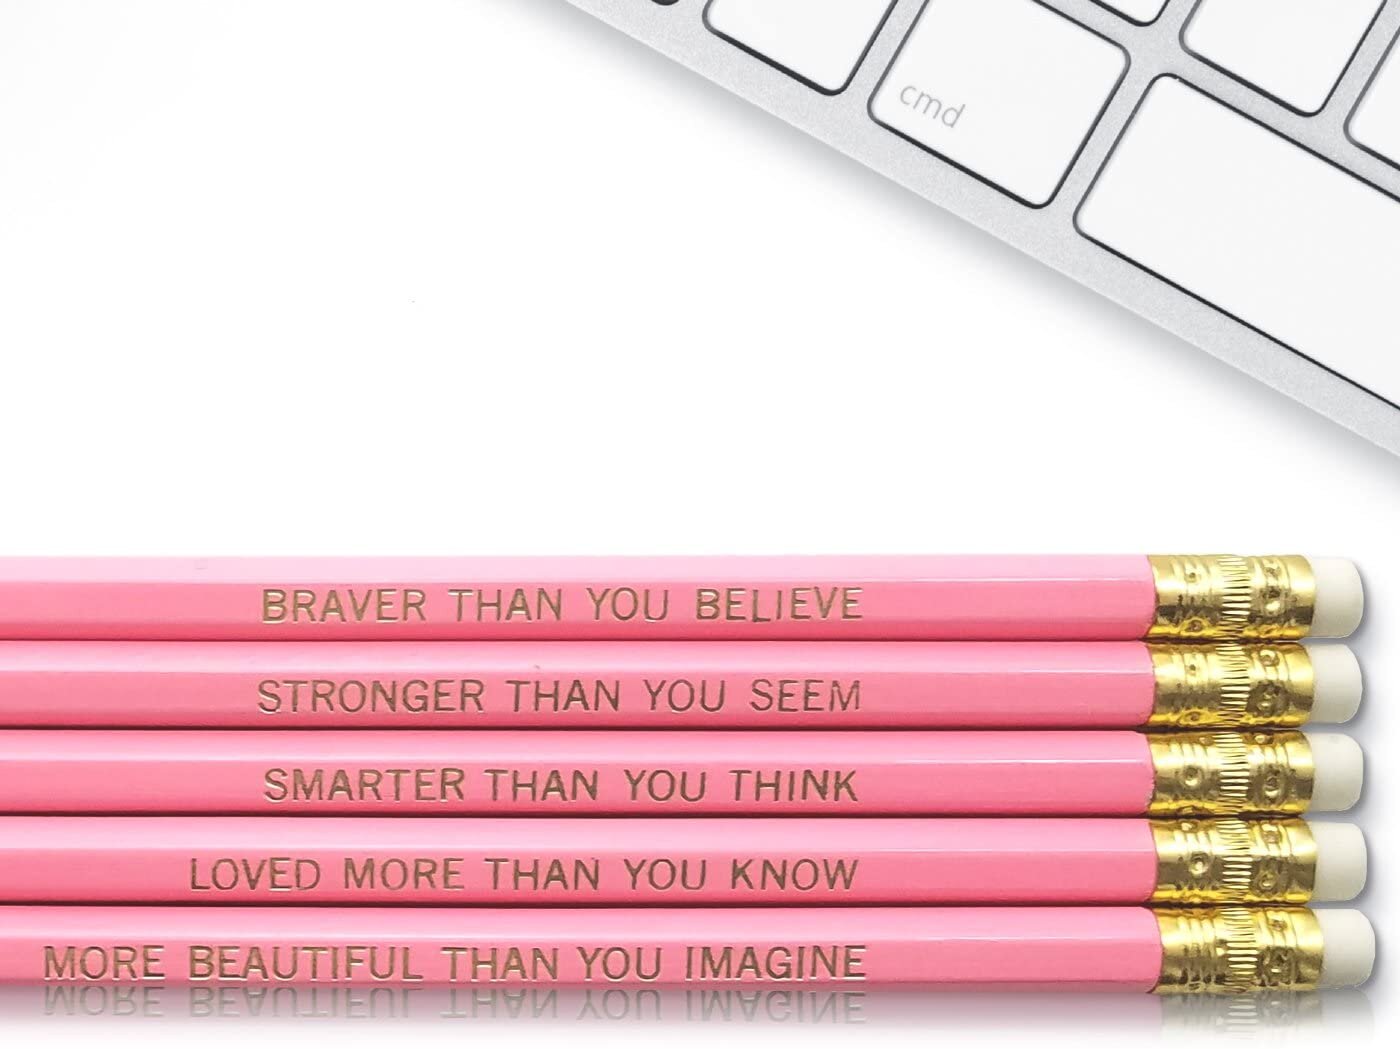 Winnie the Pooh Quote - Inspirational Pencils Engraved With Funny And Motivational Sayings For School And The Office - Amazon.jpg